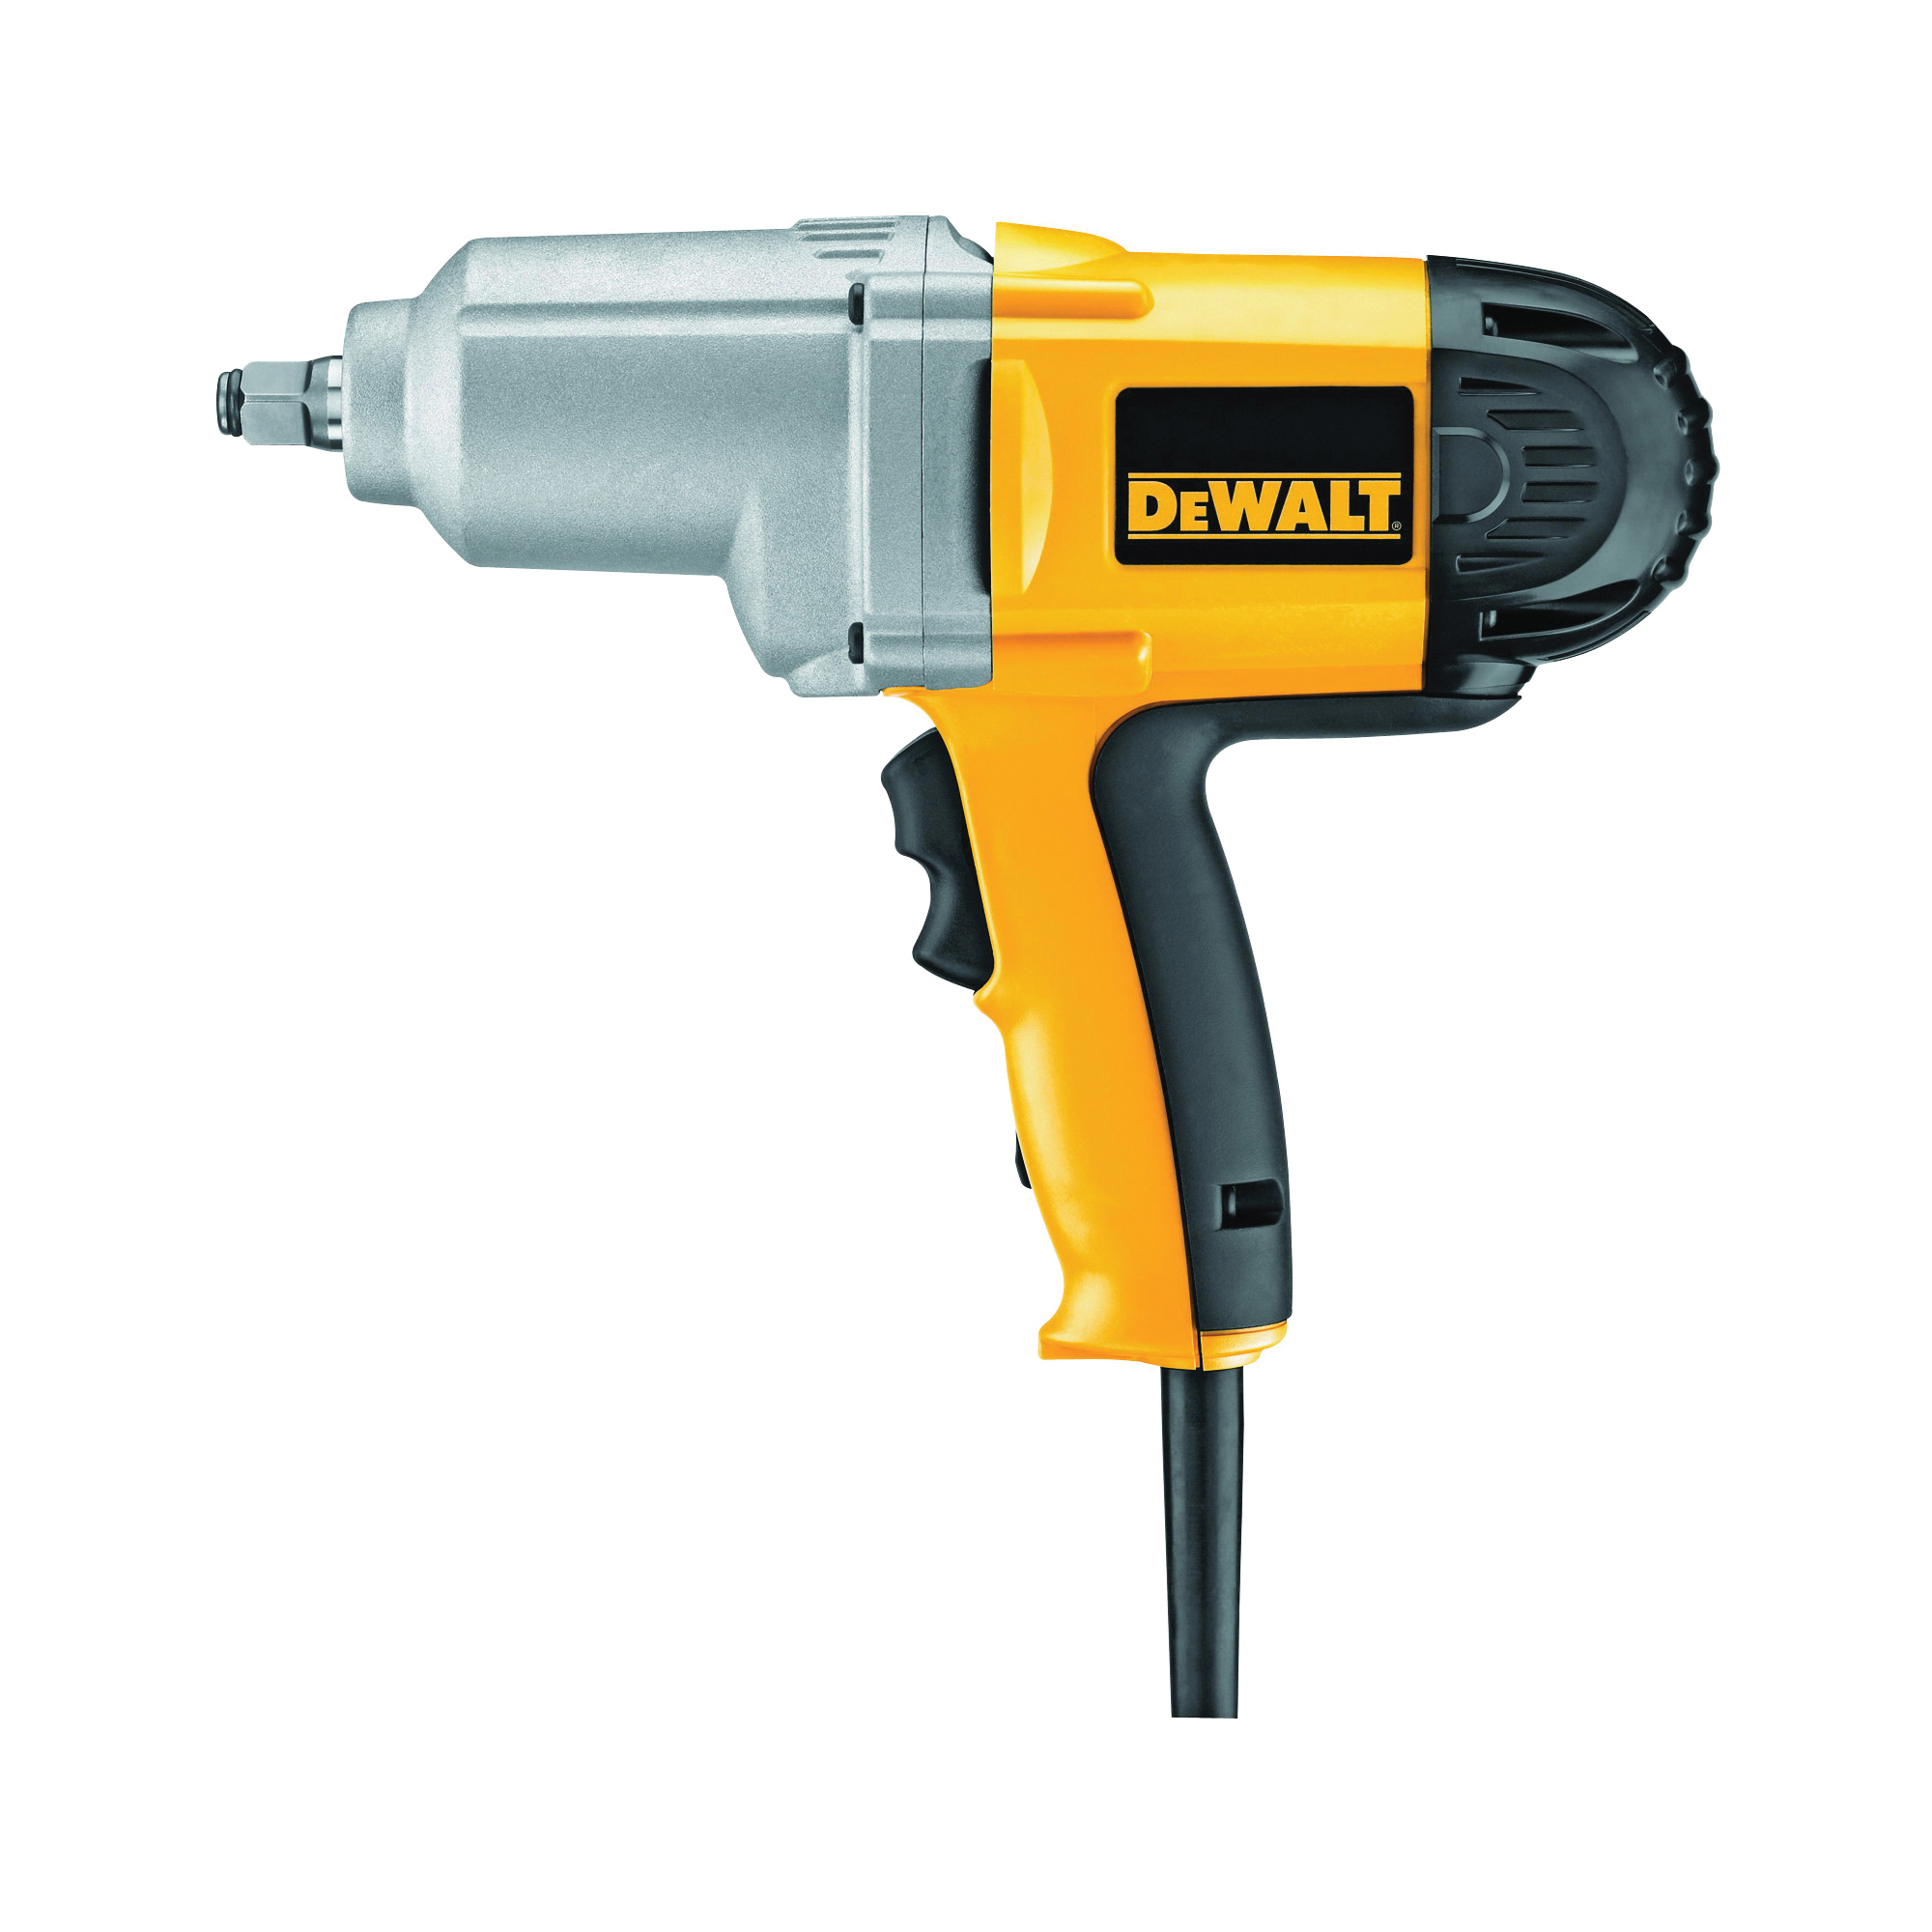 DW293 Impact Wrench with Hog Ring Anvil, 7.5 A, 1/2 in Drive, Square Drive, 2700 ipm, 2100 rpm Speed